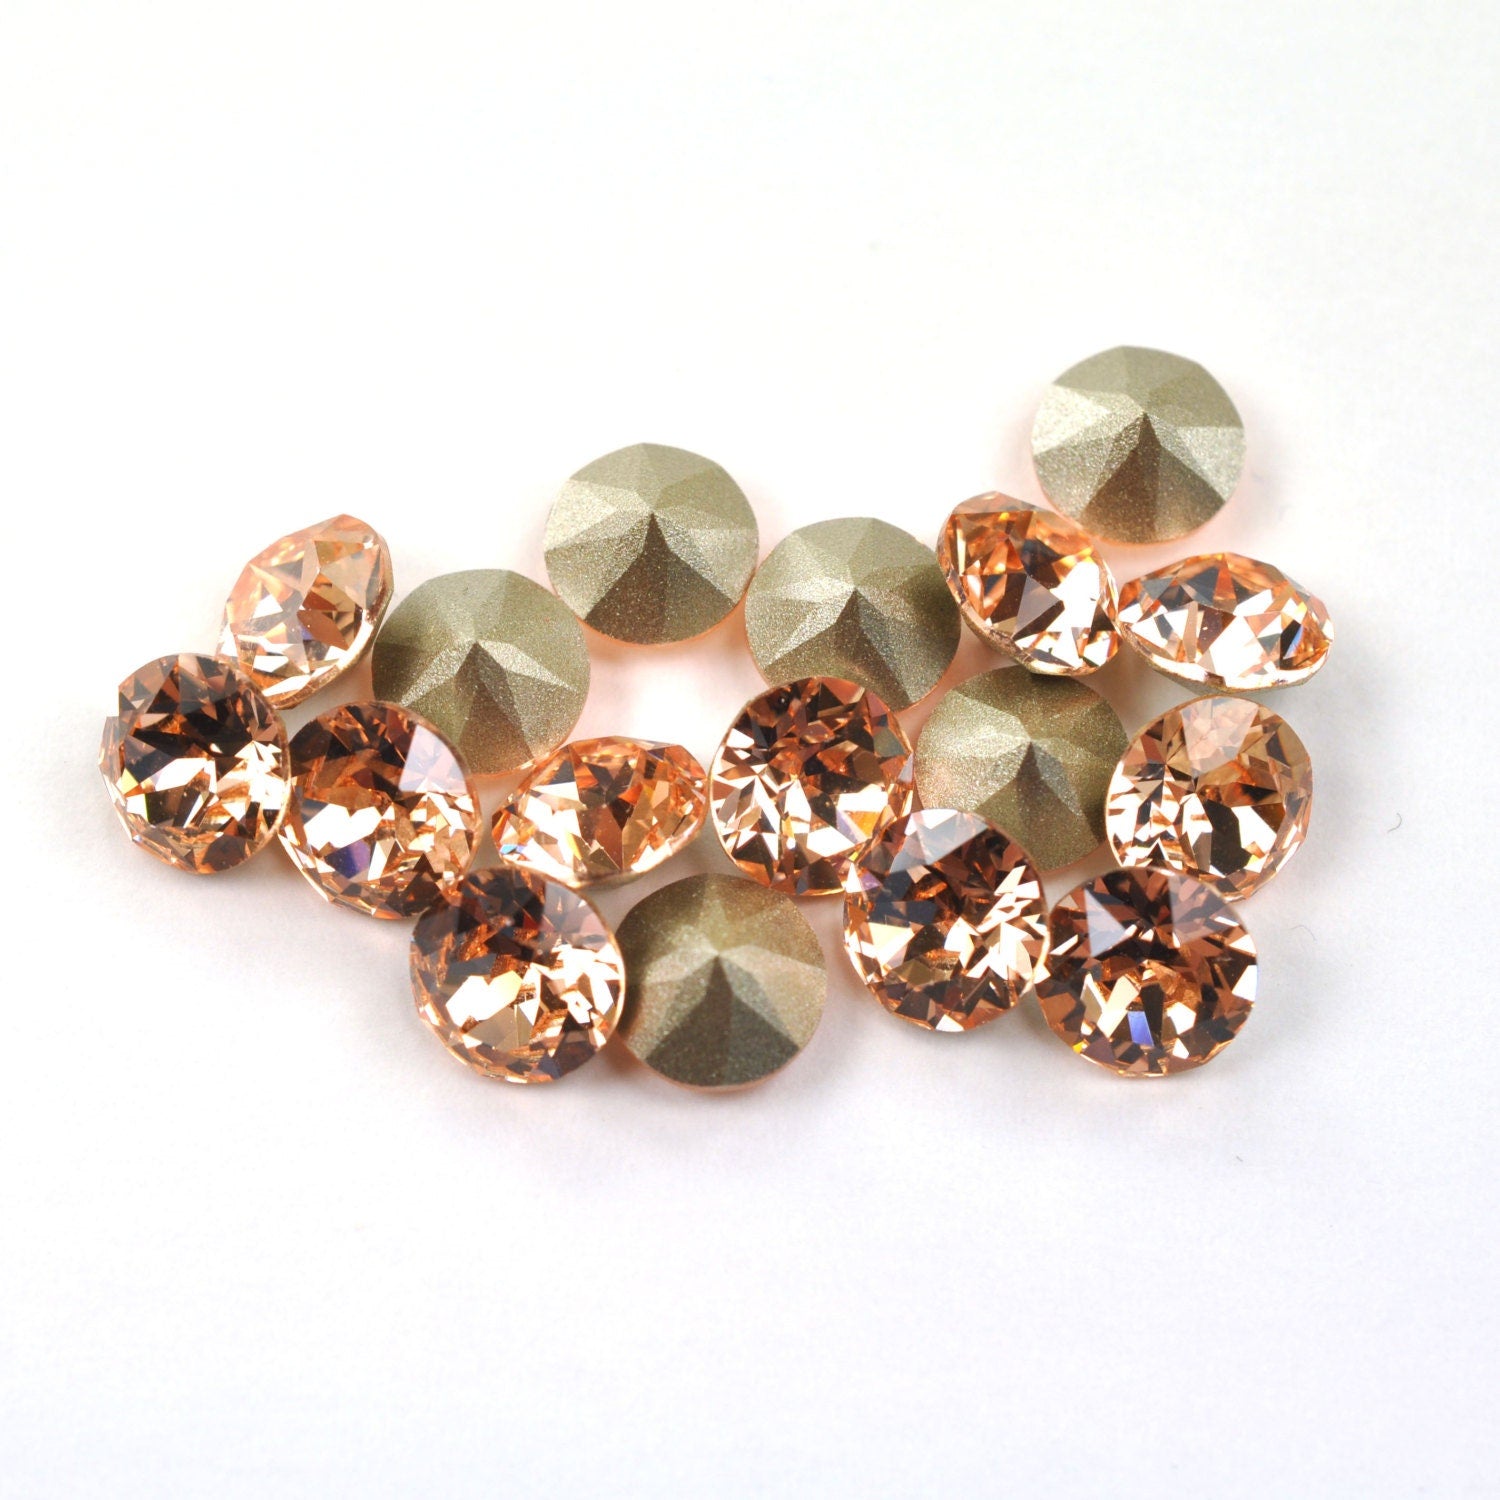 Light Peach 1088 Pointed Back Chaton Barton Crystal 39ss, 8mm